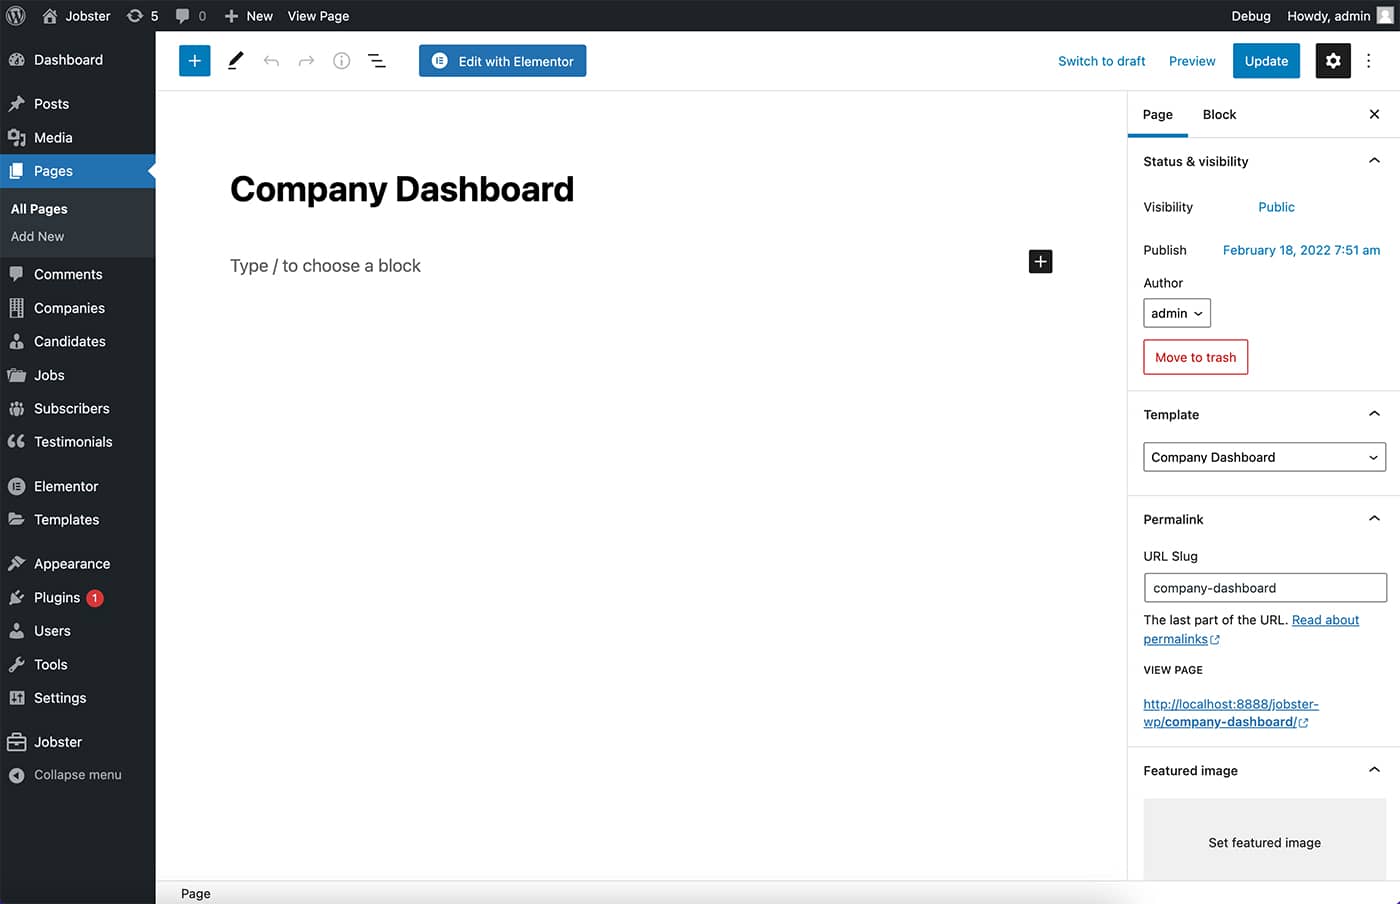 Jobster company dashboard page template